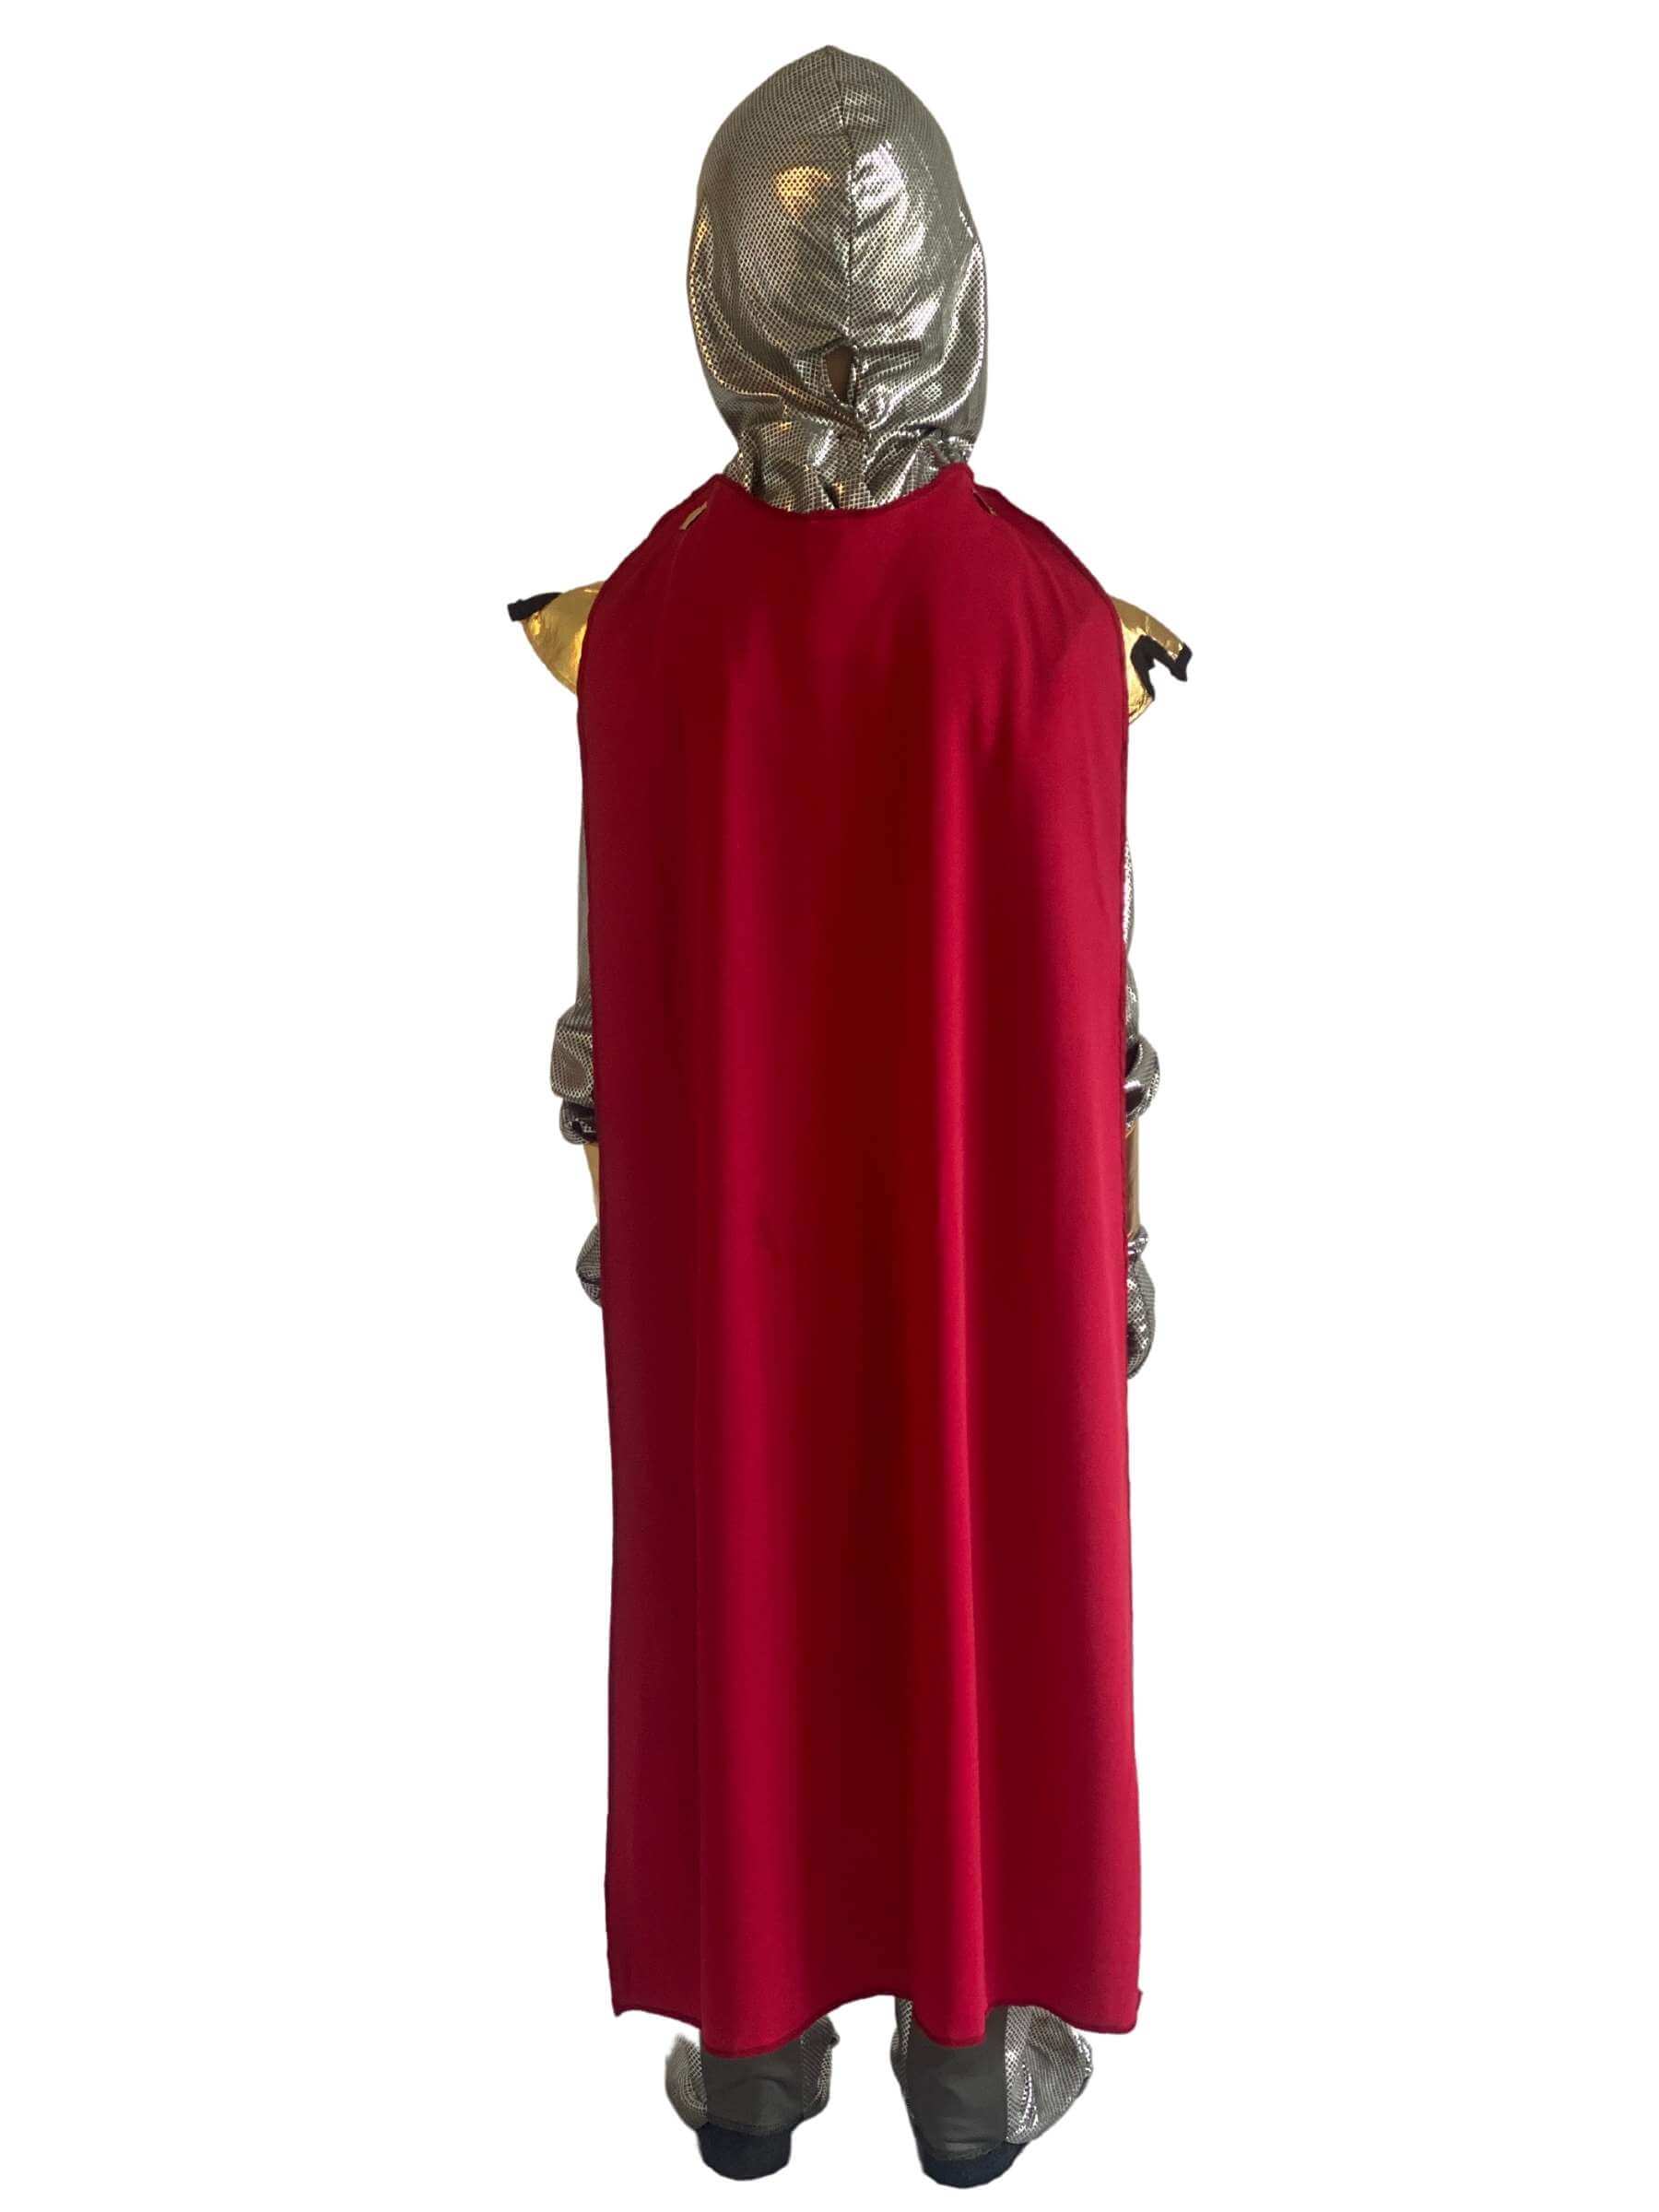 Back of the boy wearing the knight costume showing the long red cape.